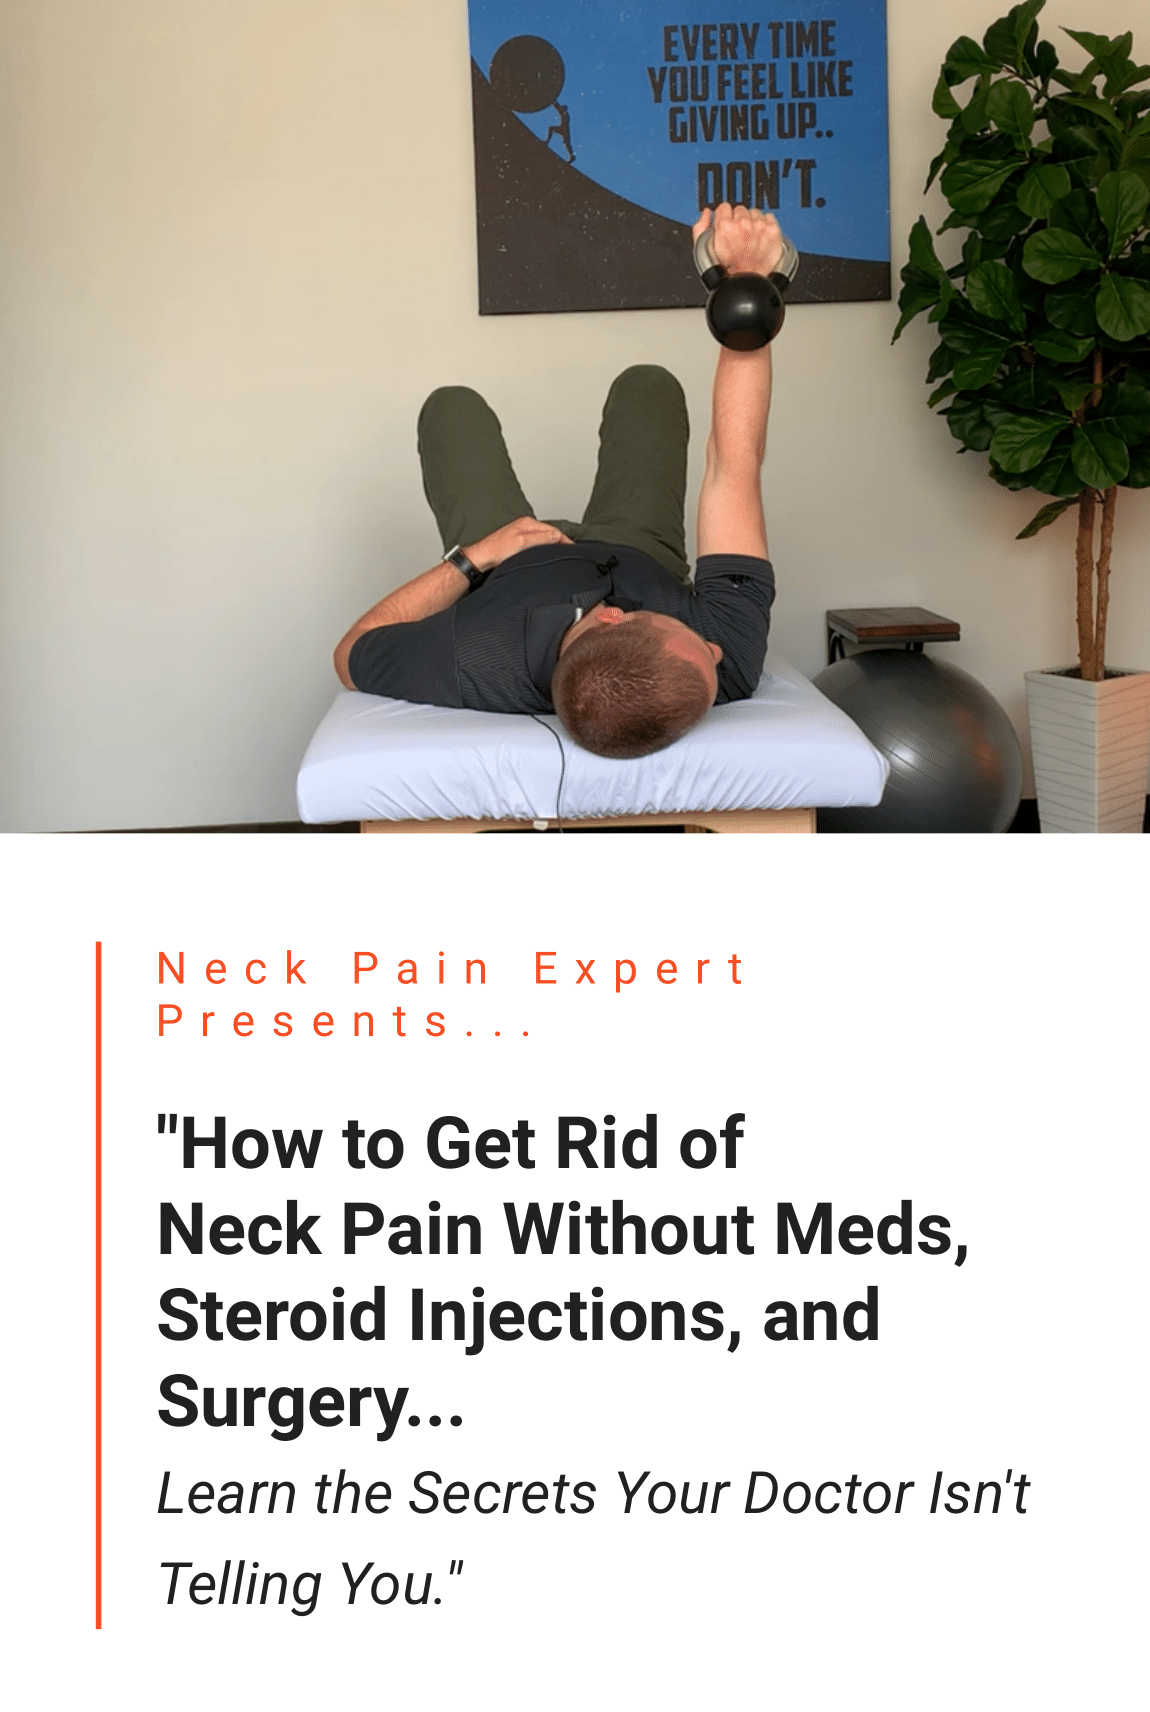 Get Rid of Neck Pain Without Meds, Injections, or Surgery